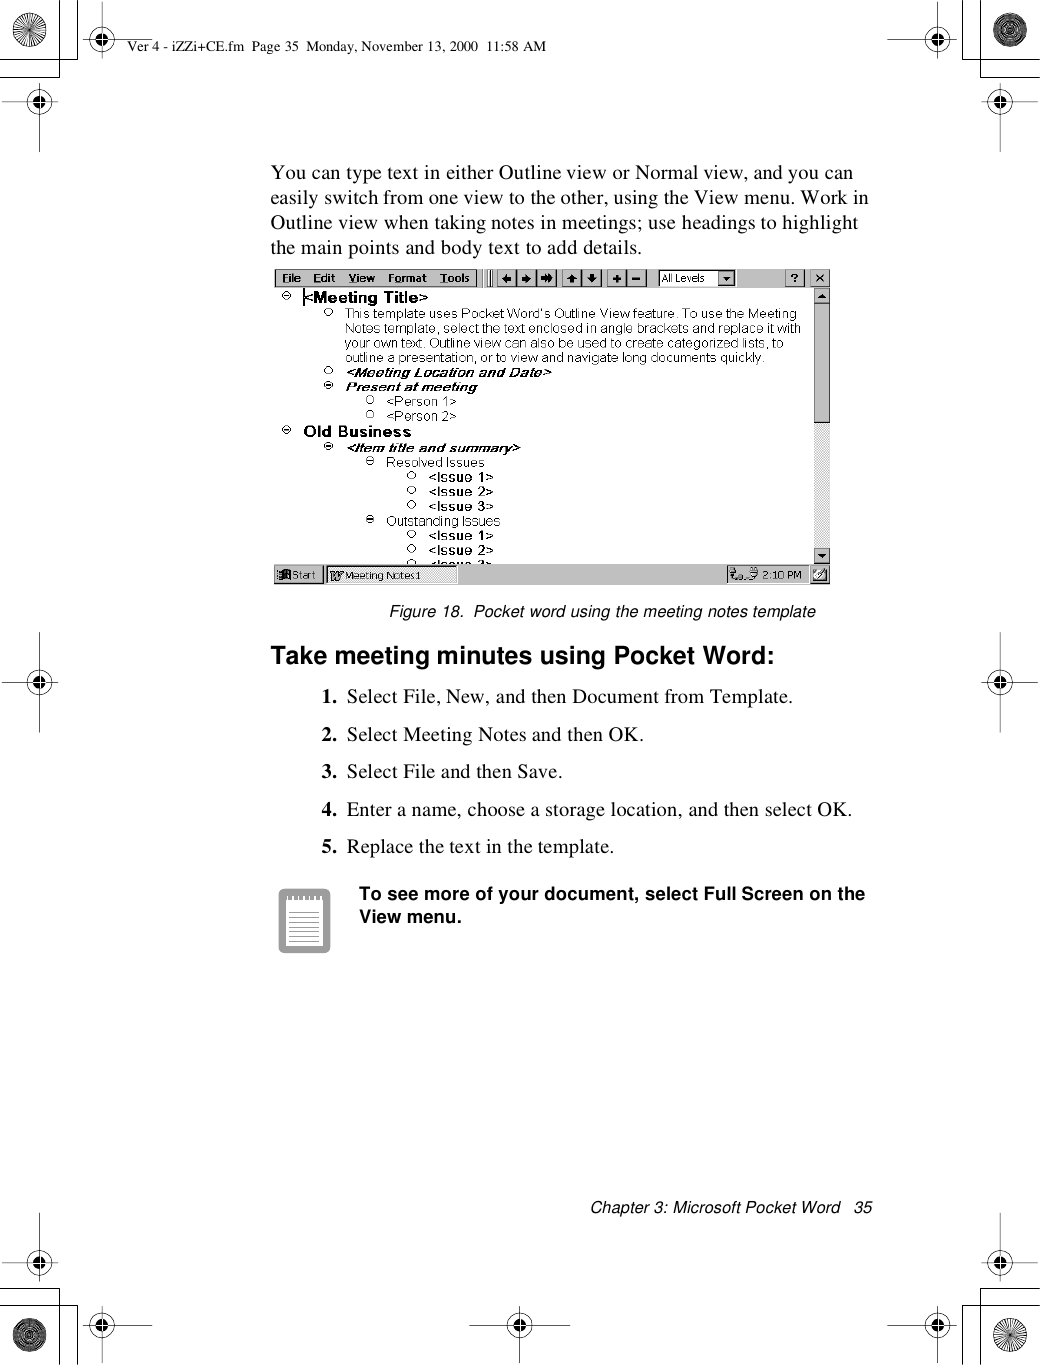 Chapter 3: Microsoft PocketWord 35You can type text in either Outline view or Normal view, and you caneasily switch from one view to the other, using the View menu. Work inOutline view when taking notes in meetings; use headings to highlightthe main points and body text to add details.Figure 18. Pocketword using themeeting notes templateTake meeting minutes using Pocket Word:1. Select File, New, and then Document from Template.2. SelectMeetingNotesandthenOK.3. Select File and then Save.4. Enter a name, choose a storage location, and then select OK.5. Replace the text in the template.To see more of your document, select Full Screen on theView menu.Ver 4 - iZZi+CE.fm Page 35 Monday, November 13, 2000 11:58 AM